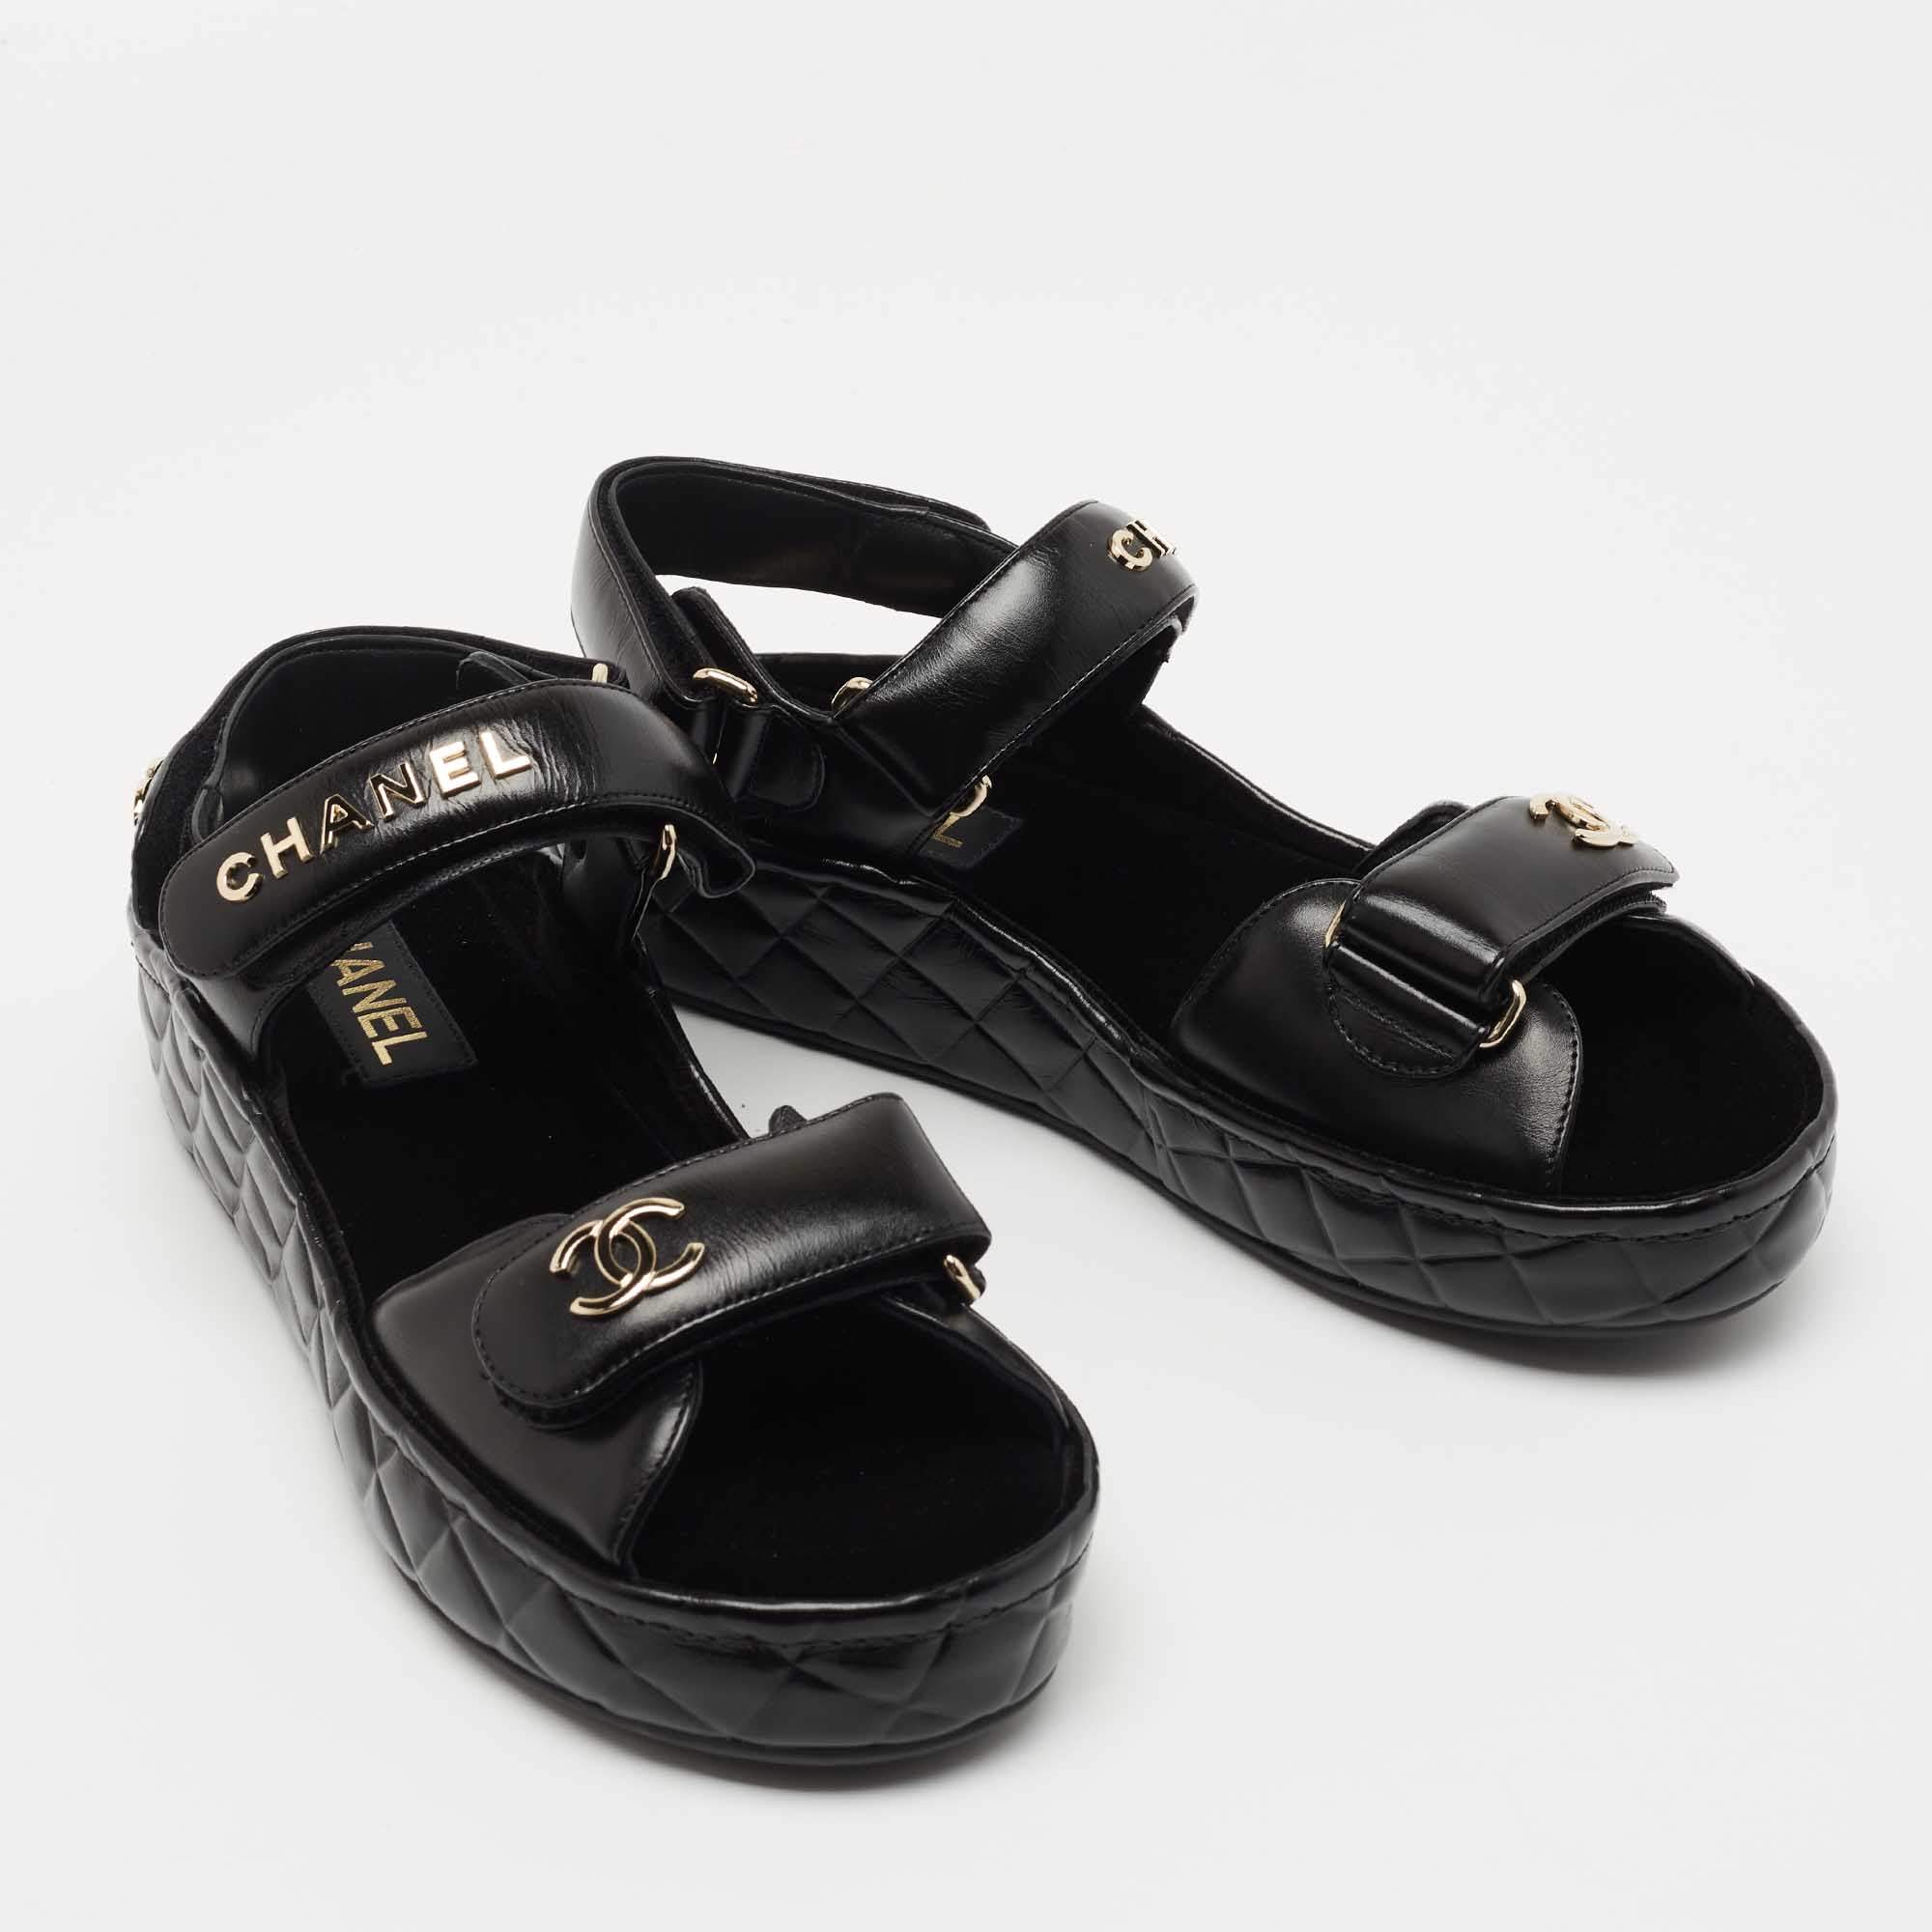 Chanel Black Leather CC Dad Flat Sandals Size 39 Chanel